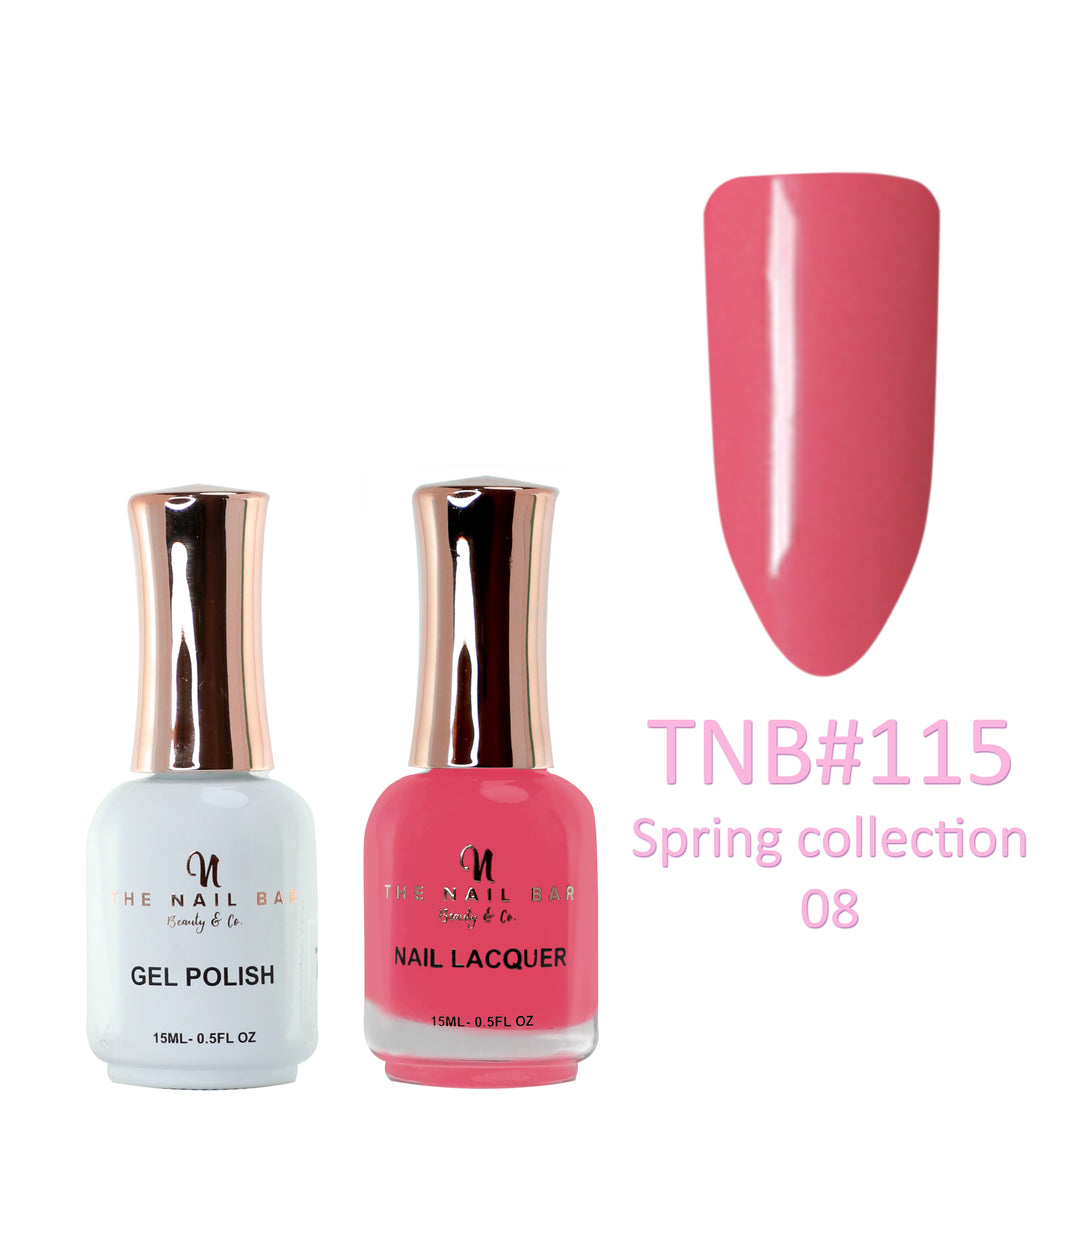 Dual Polish/Gel colour matching (15ml) - Spring collection 08